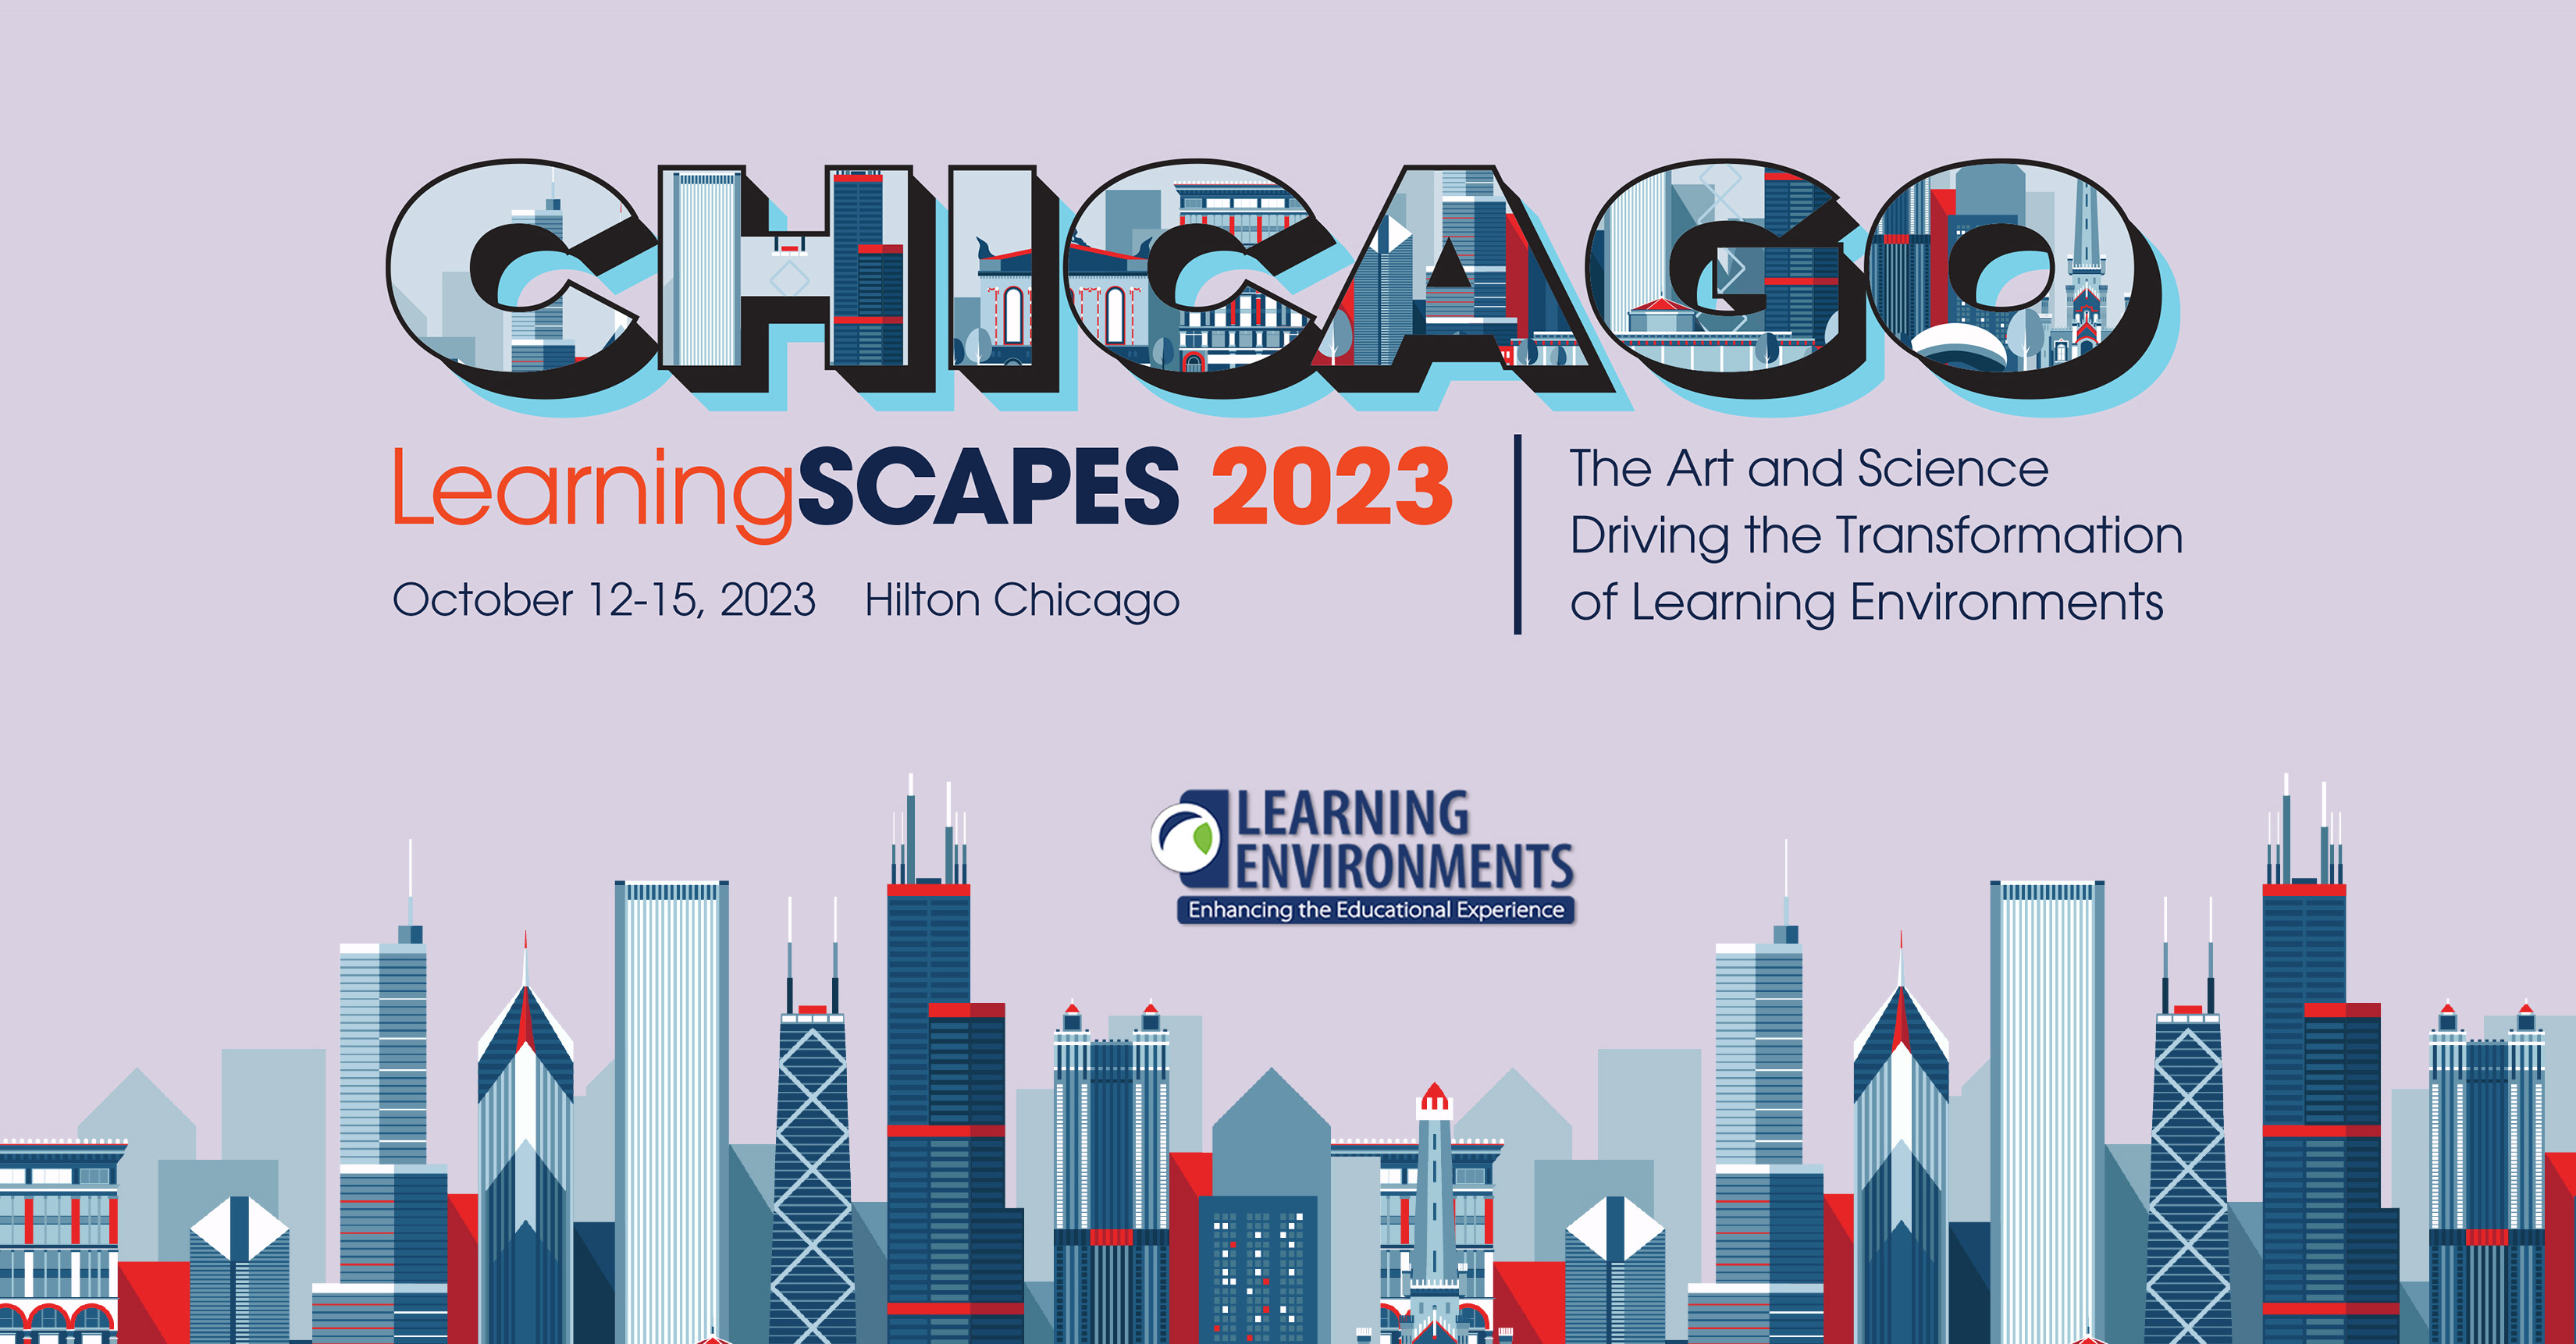 LearningSCAPES 2023